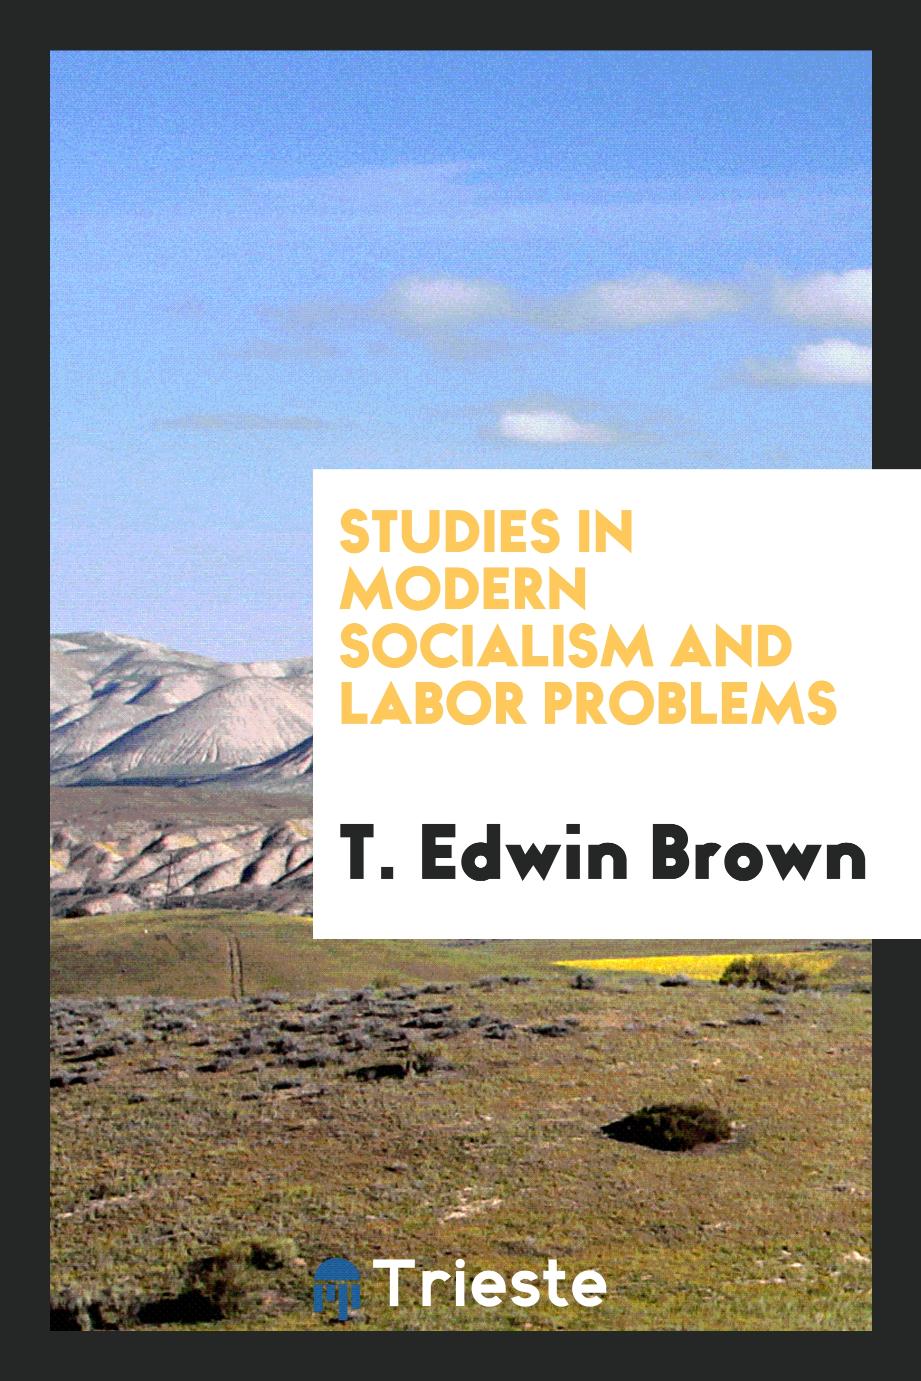 Studies in modern socialism and labor problems